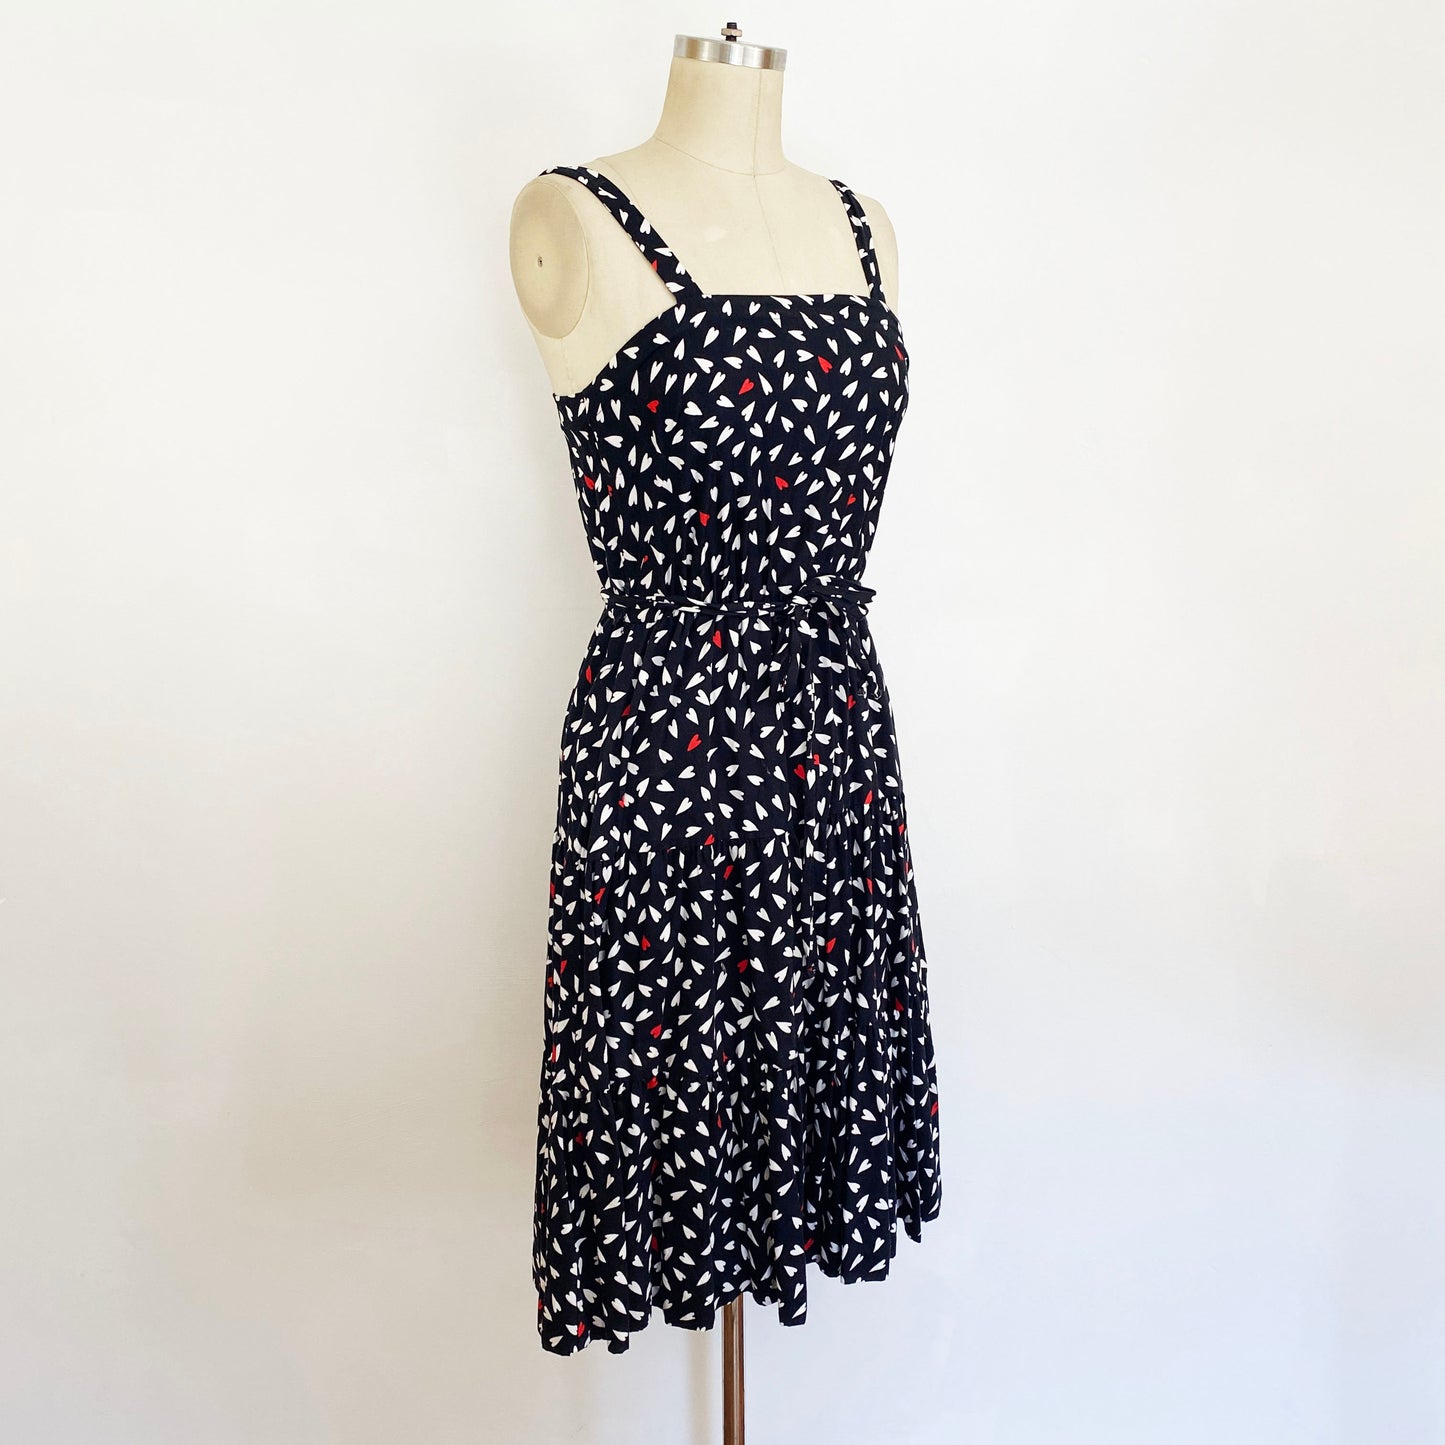 1970s Black and White Red Heart Fit and Flare Cotton Sundress Cute Playful Dress Vintage Love Dress / Murray Meisner / Small